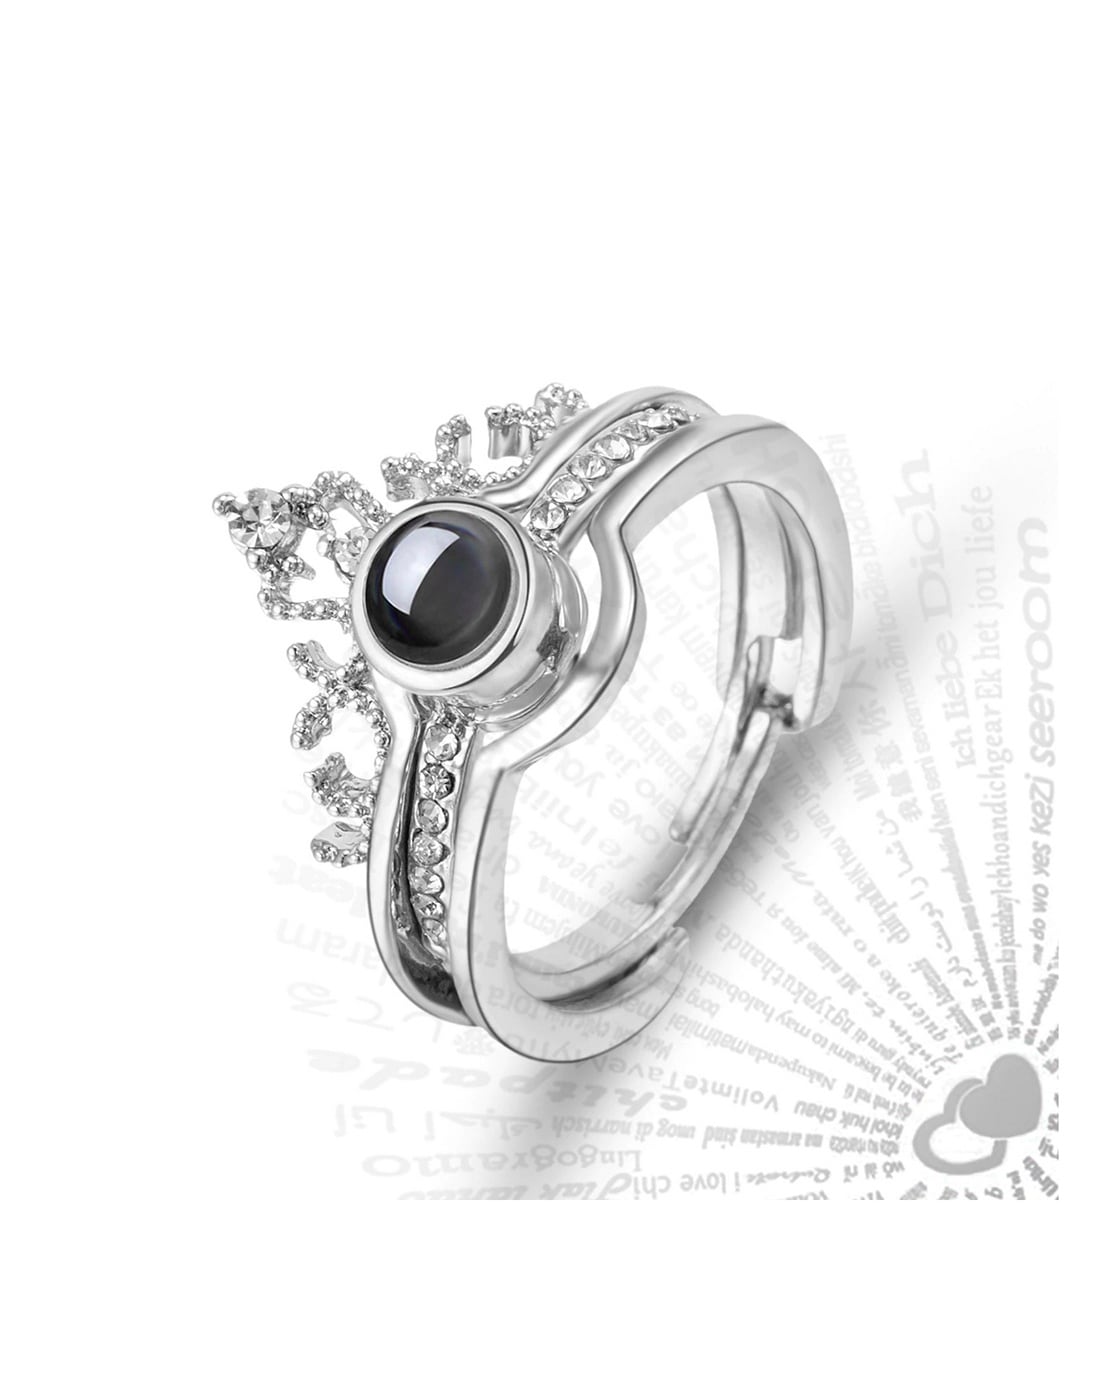 Urbana Silver Plated single Adjustable Ring Reflecting I love you In 1